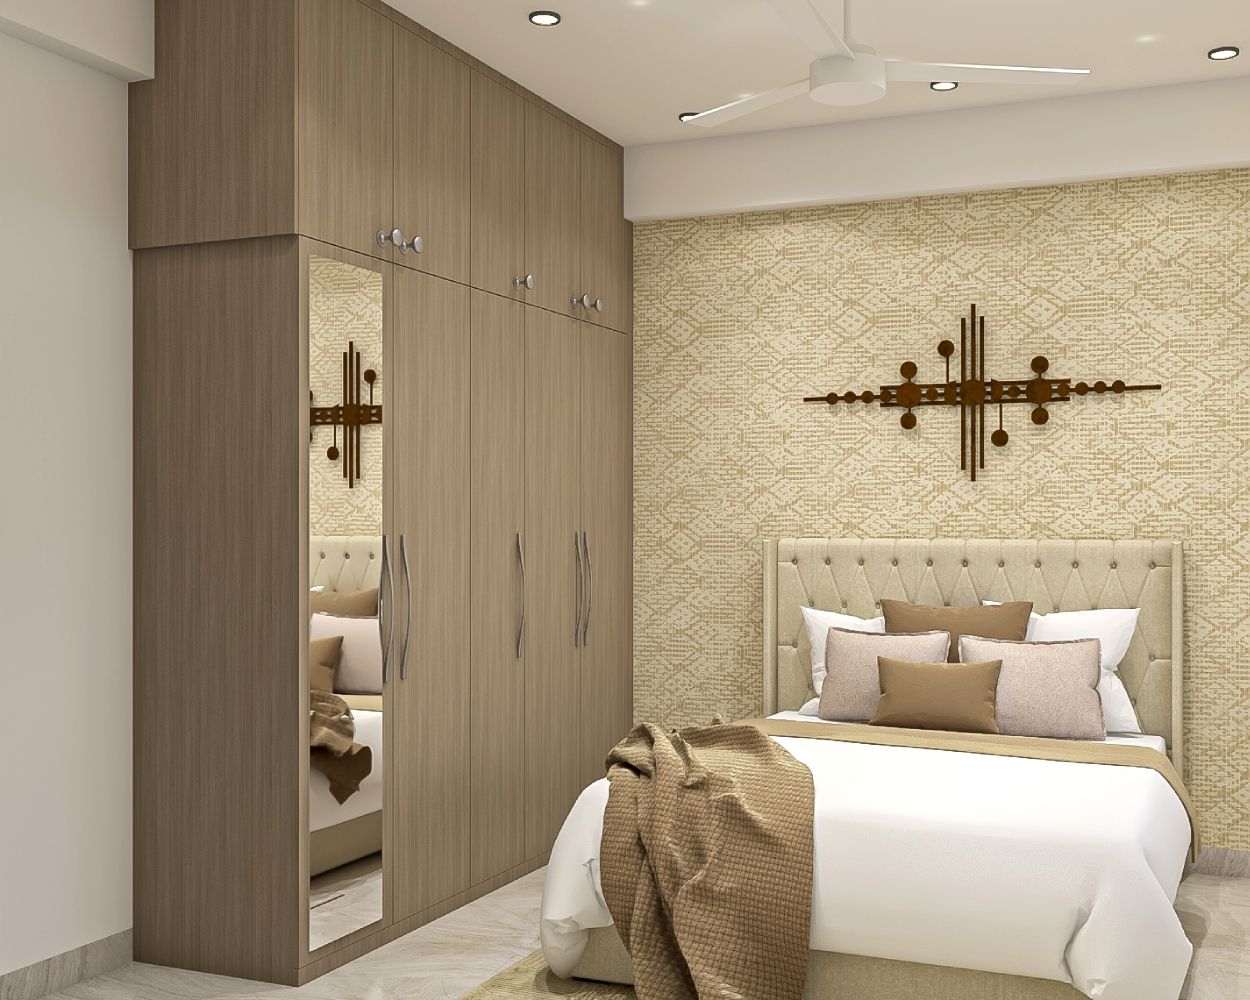 Contemporary Beige-Toned Guest Bedroom Design With Patterned Wallpaper